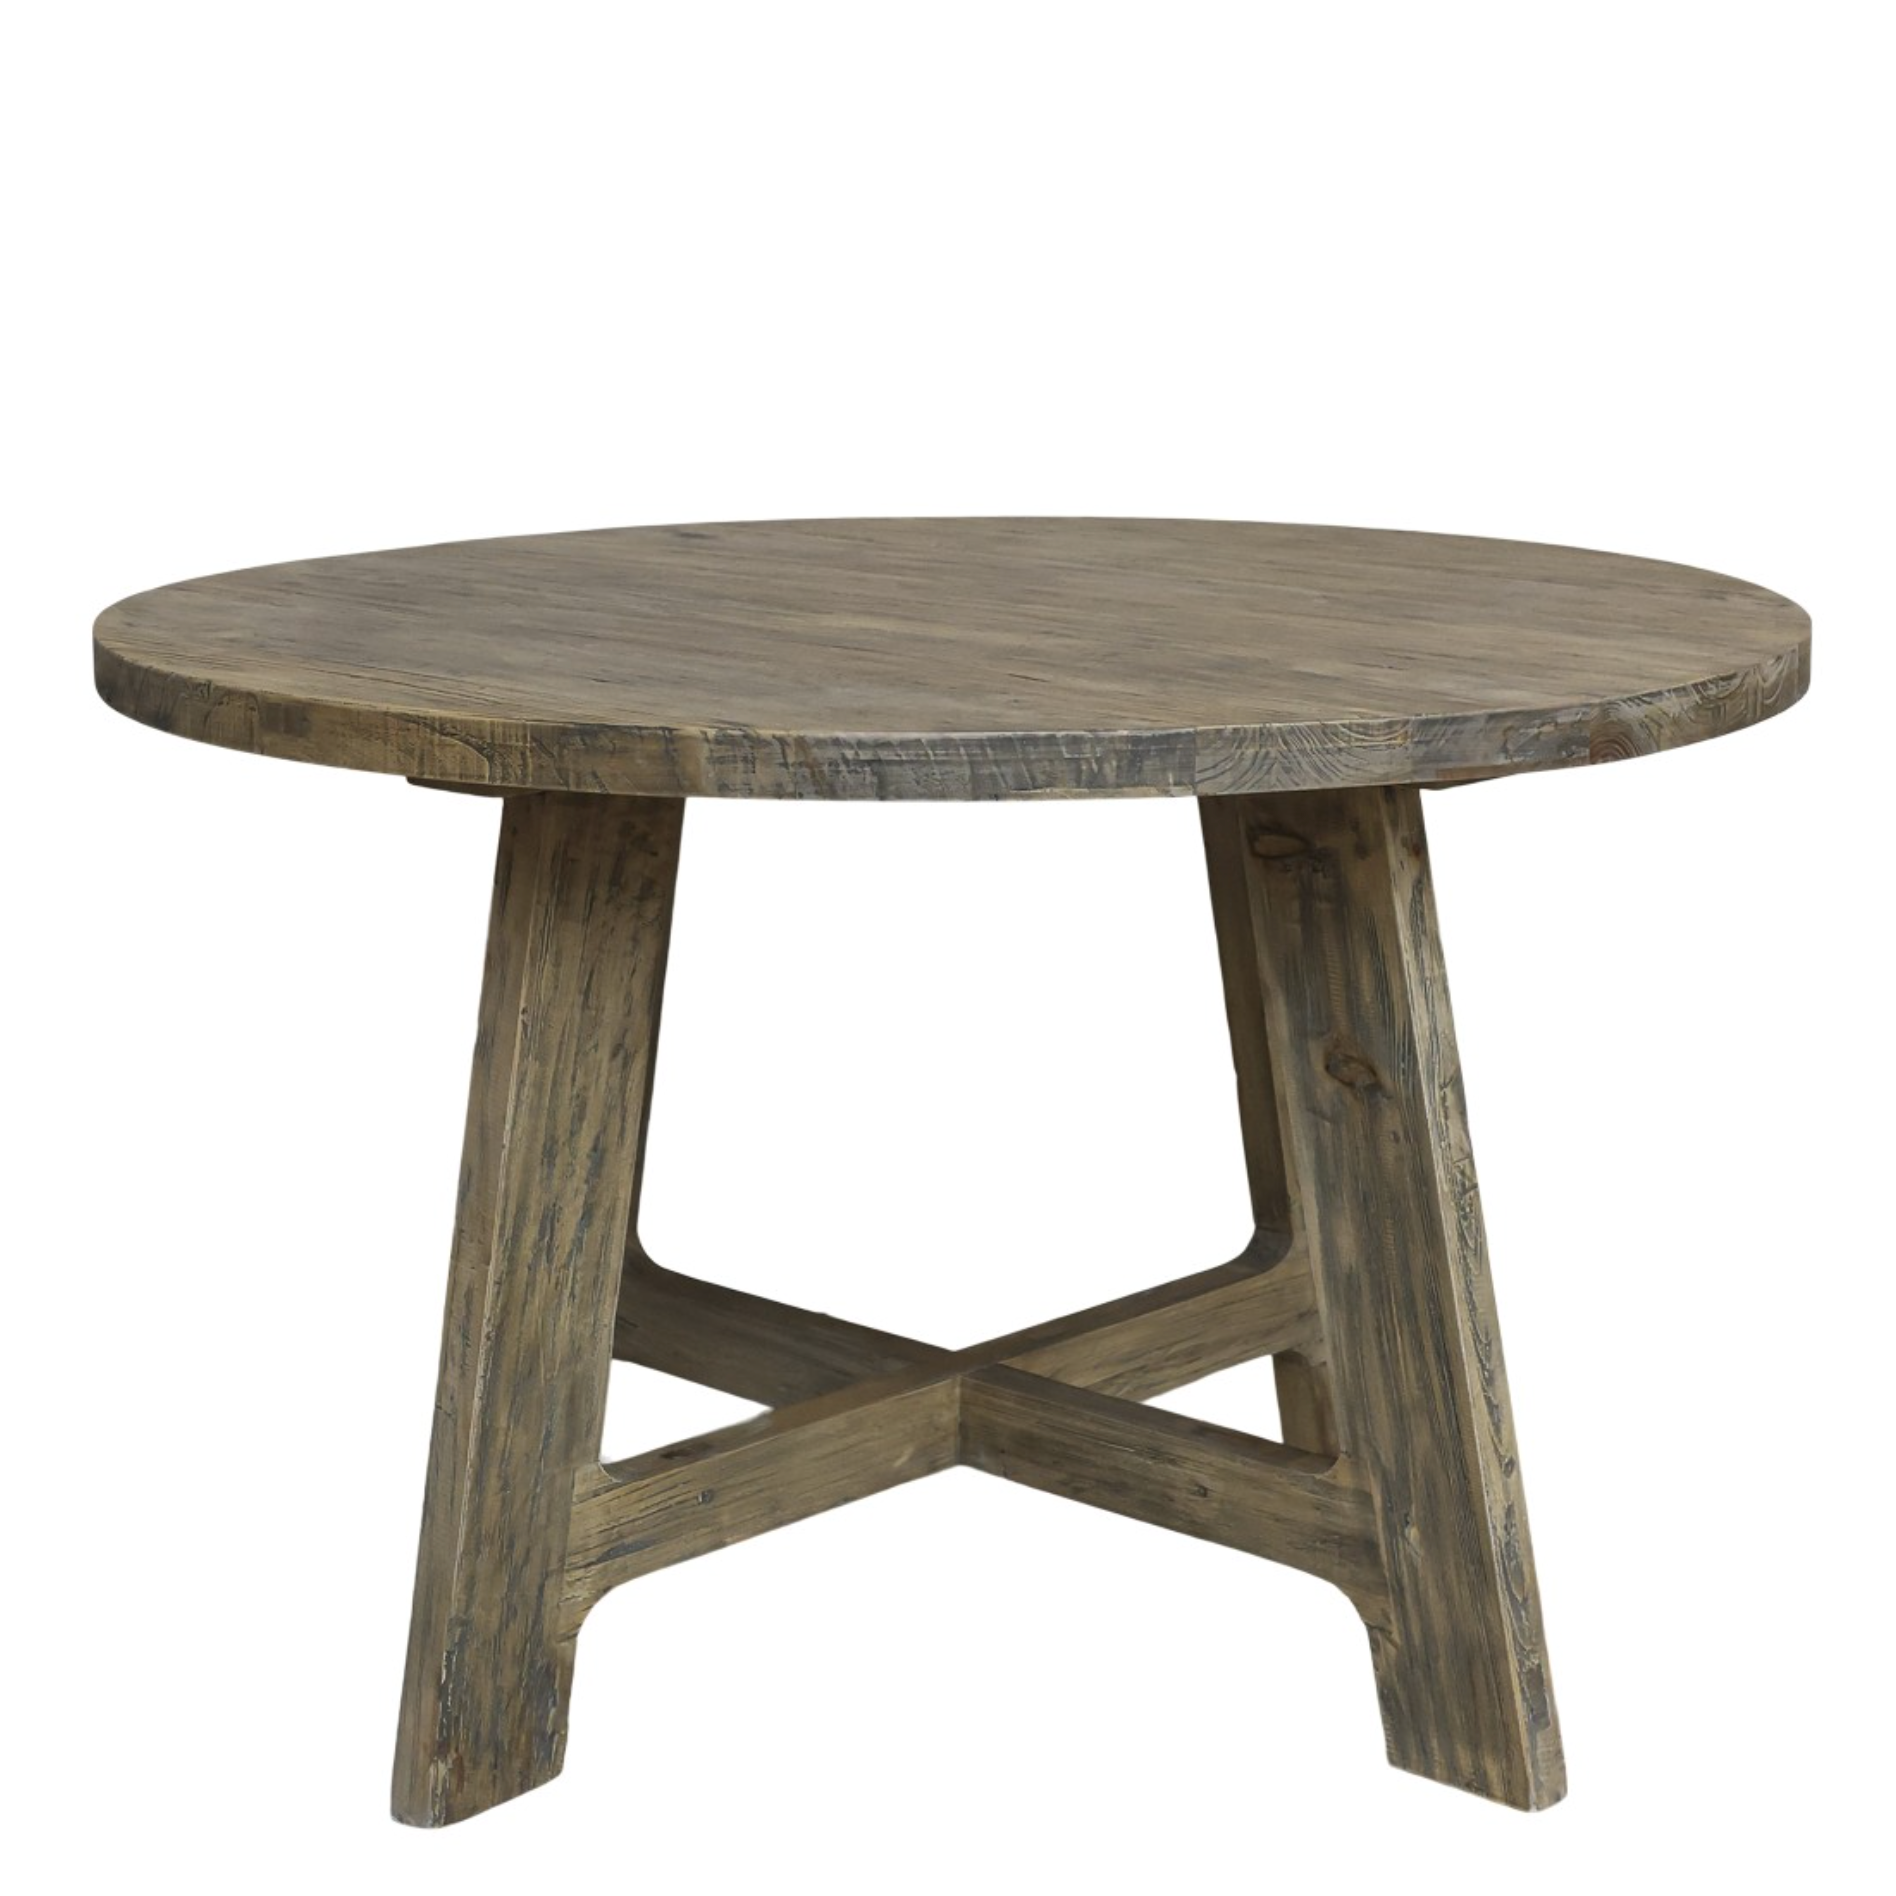 Round wood dining table.